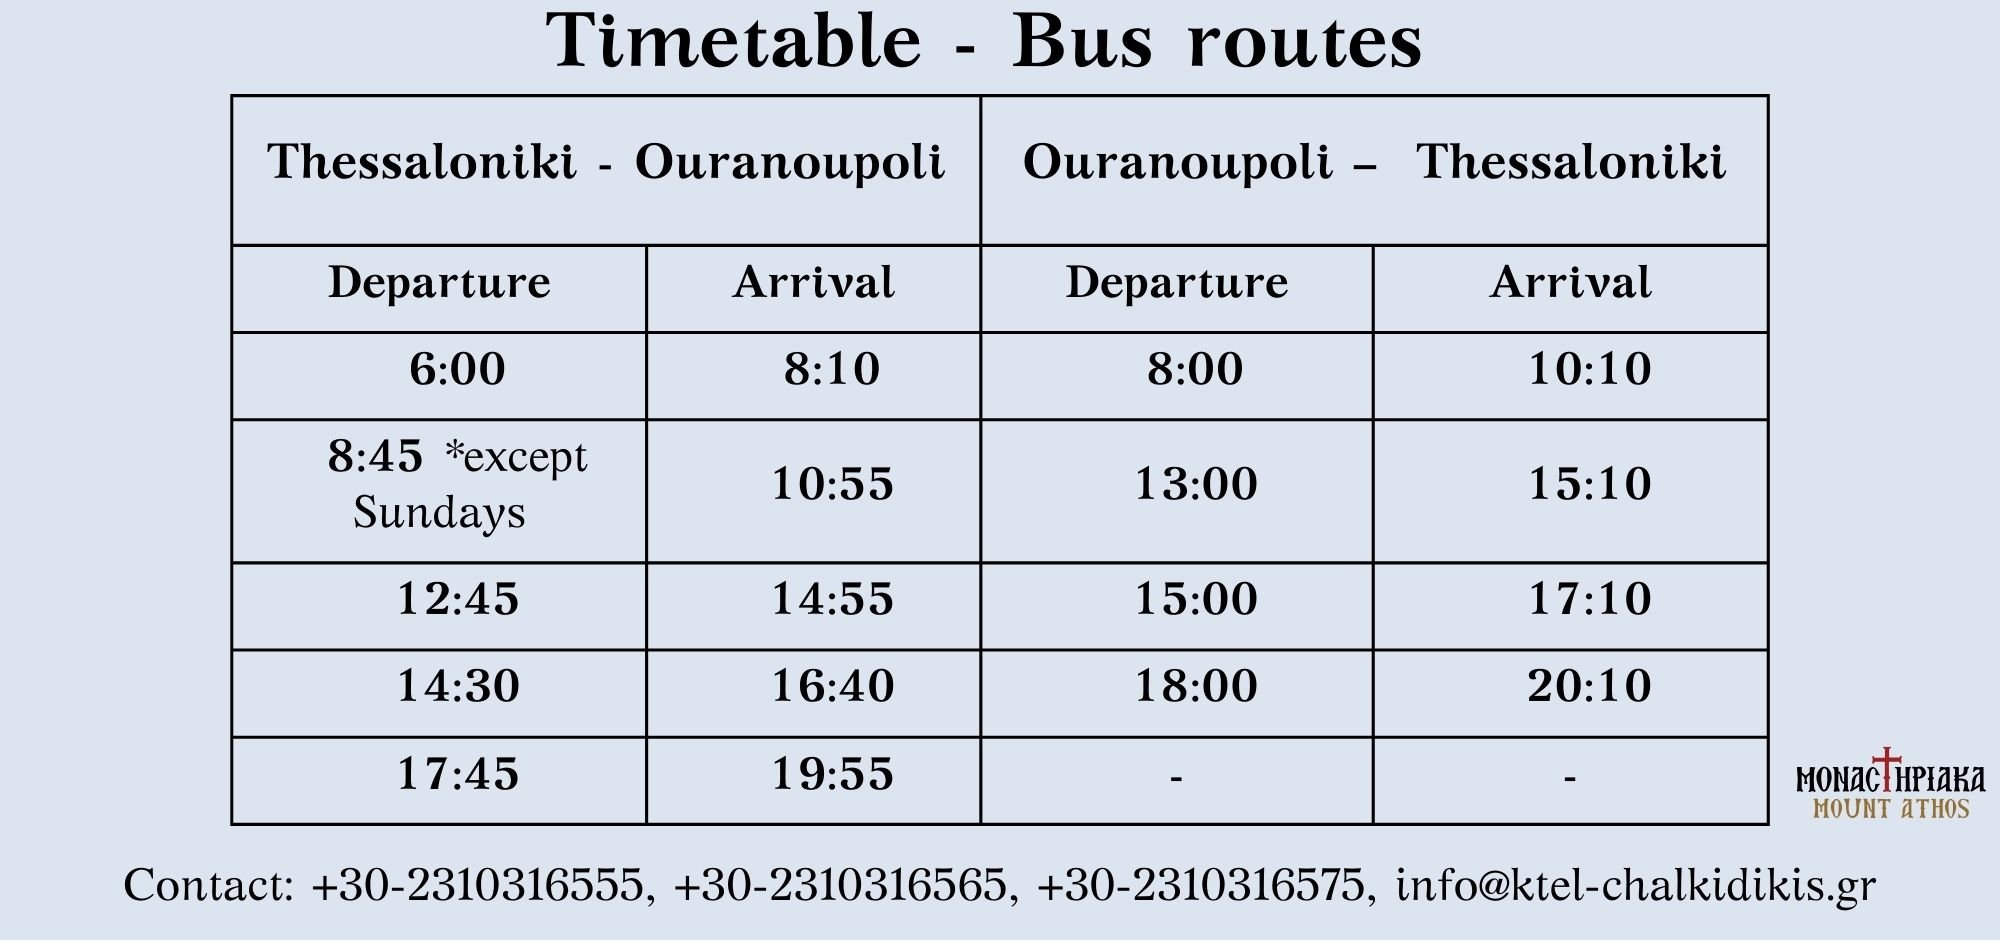 Timetable of KTEL bus schedule to Ouranoupoli, Chalkidiki